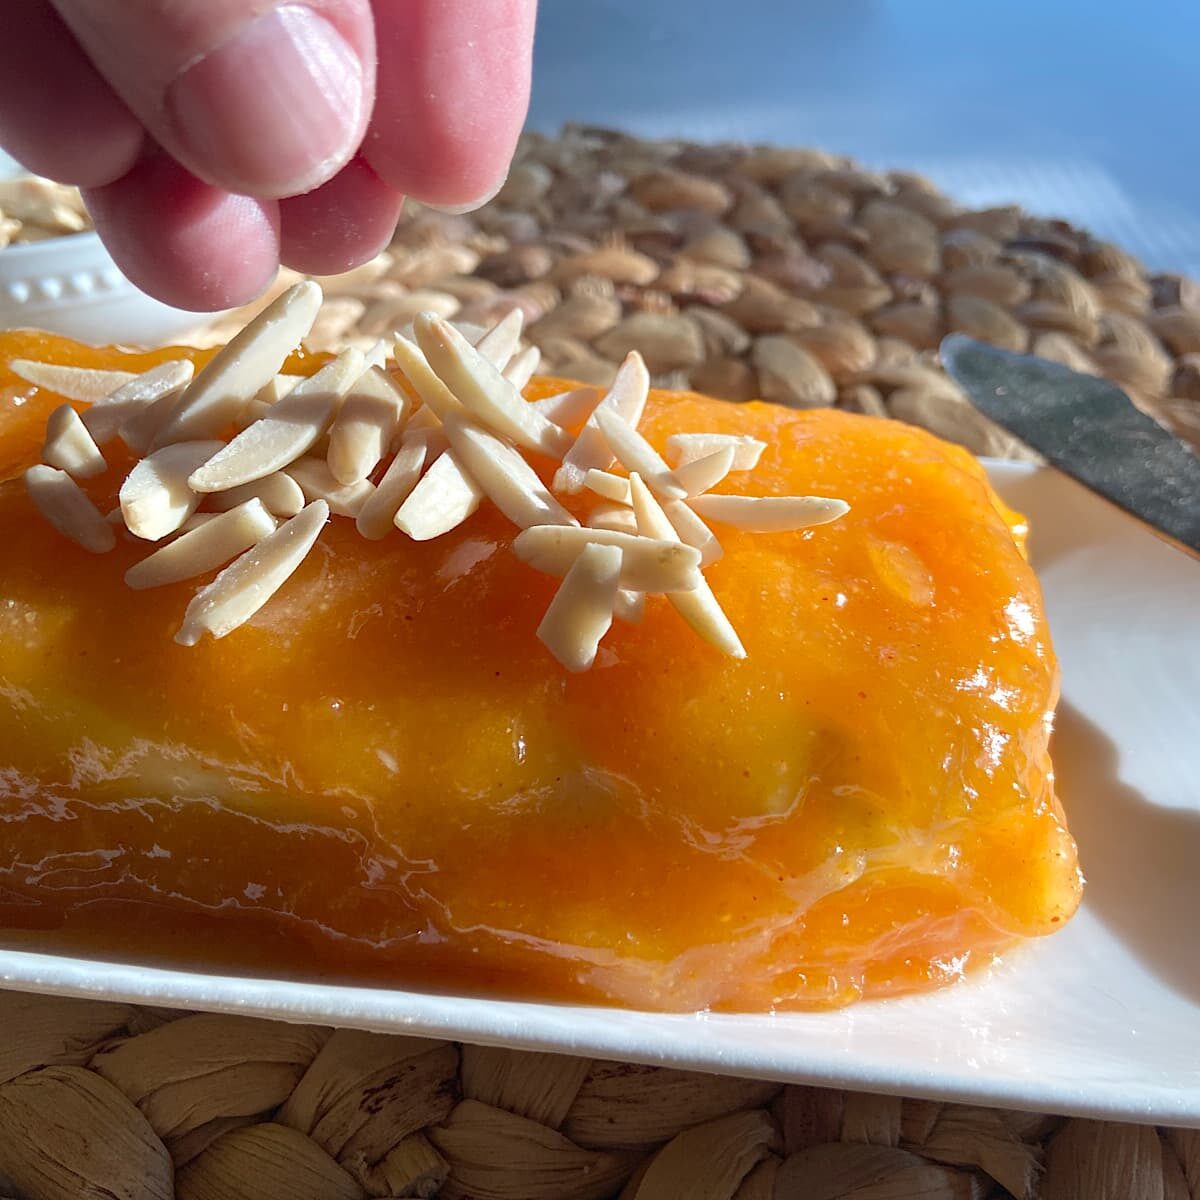 sprinkle toasted almonds on cream apricot glazed cream cheese log.